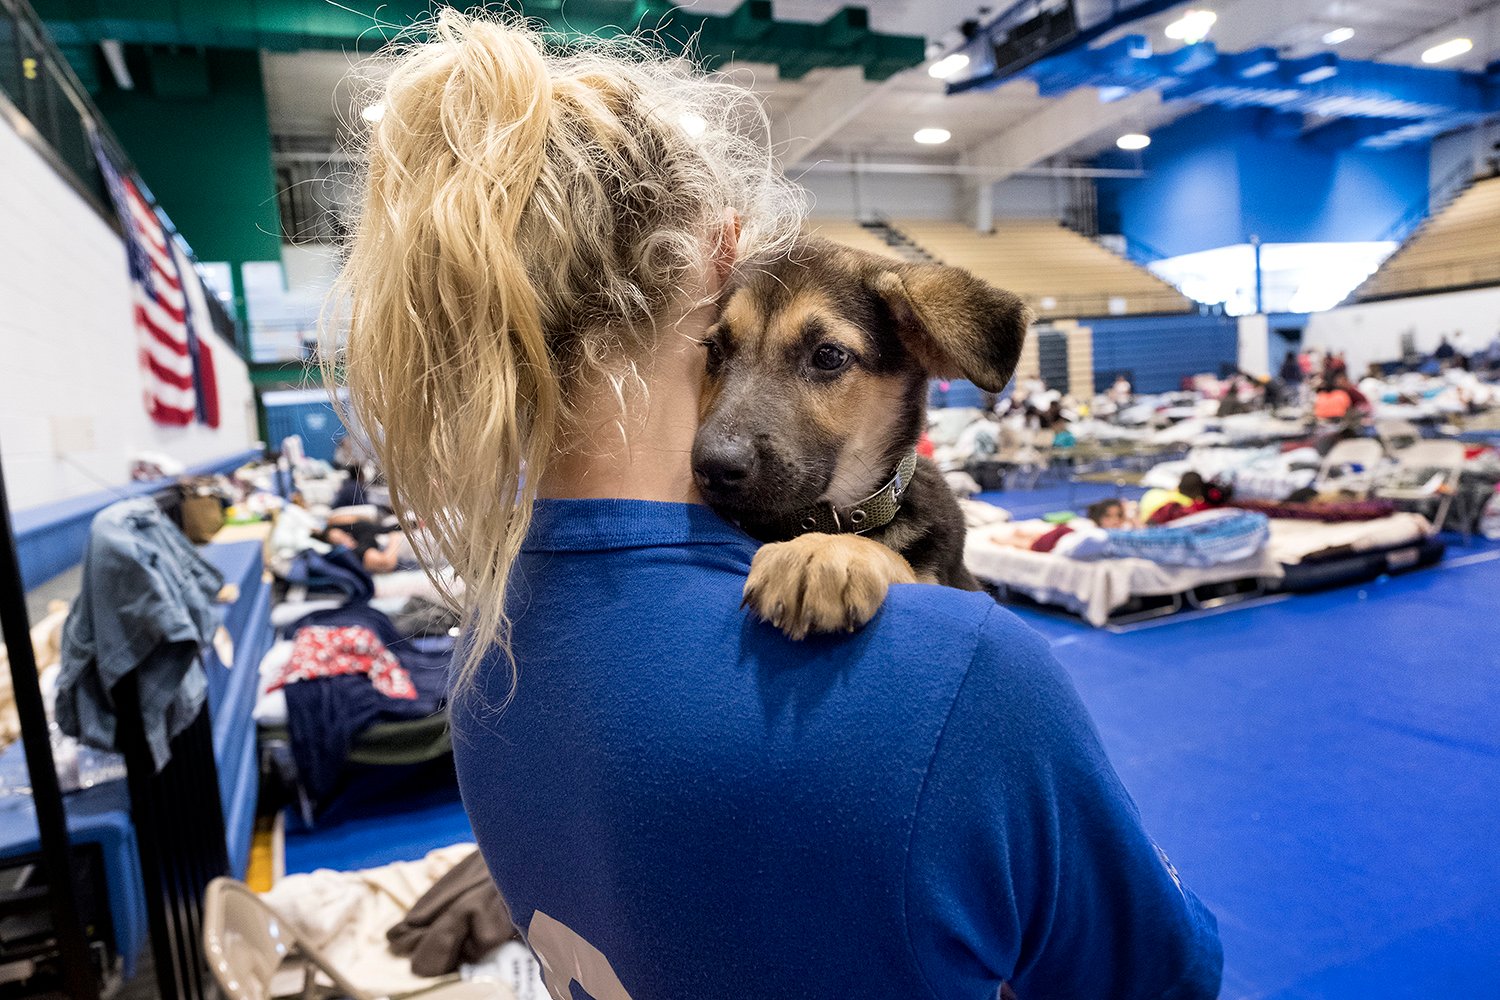 Tesa Rutherford, 21, and her fiancé Brandon Olivarez, 22 recently moved to Rockport, where they lost everything to Hurricane Harvey. When they went to check on their property, they found a puppy, rescued him and named him Harvey. They took shelter at the Wilhemina Delco Center emergency hurricane shelter in Austin, Texas on Tuesday, August 29, 2017.